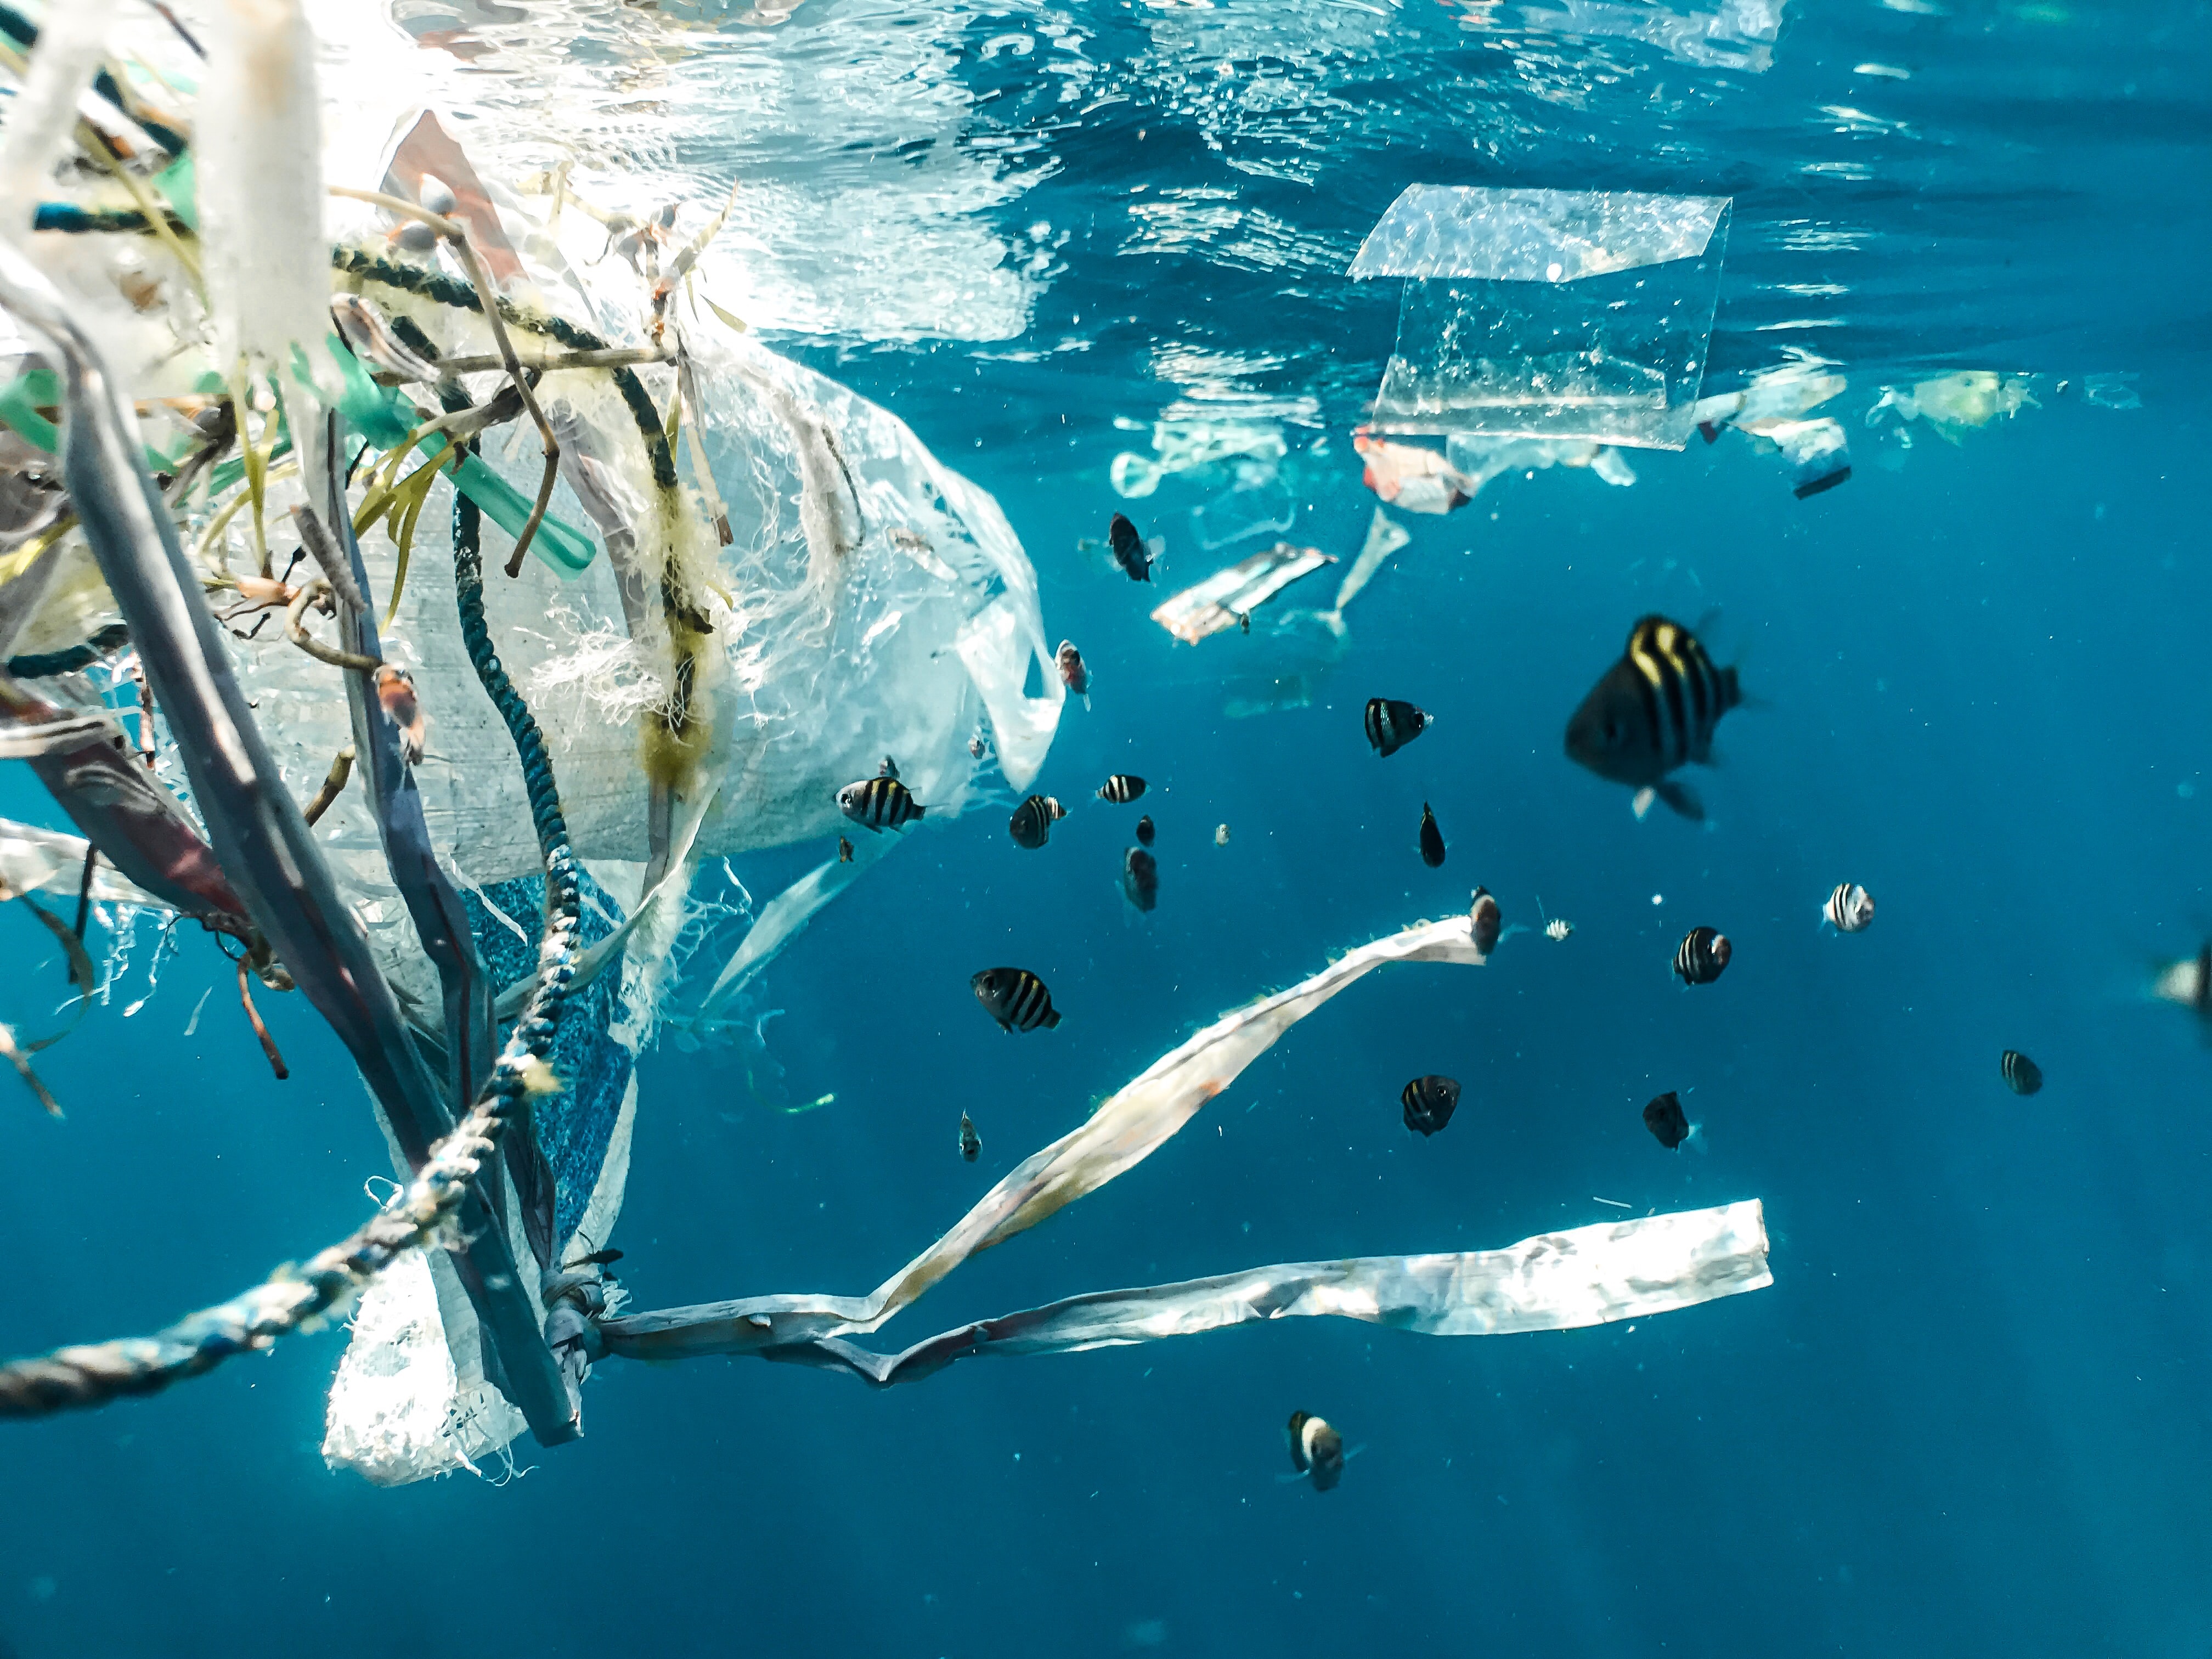 Part 1: Clean Beaches Week: Could Robotic Fish Solve the Microplastic Pollution Problem